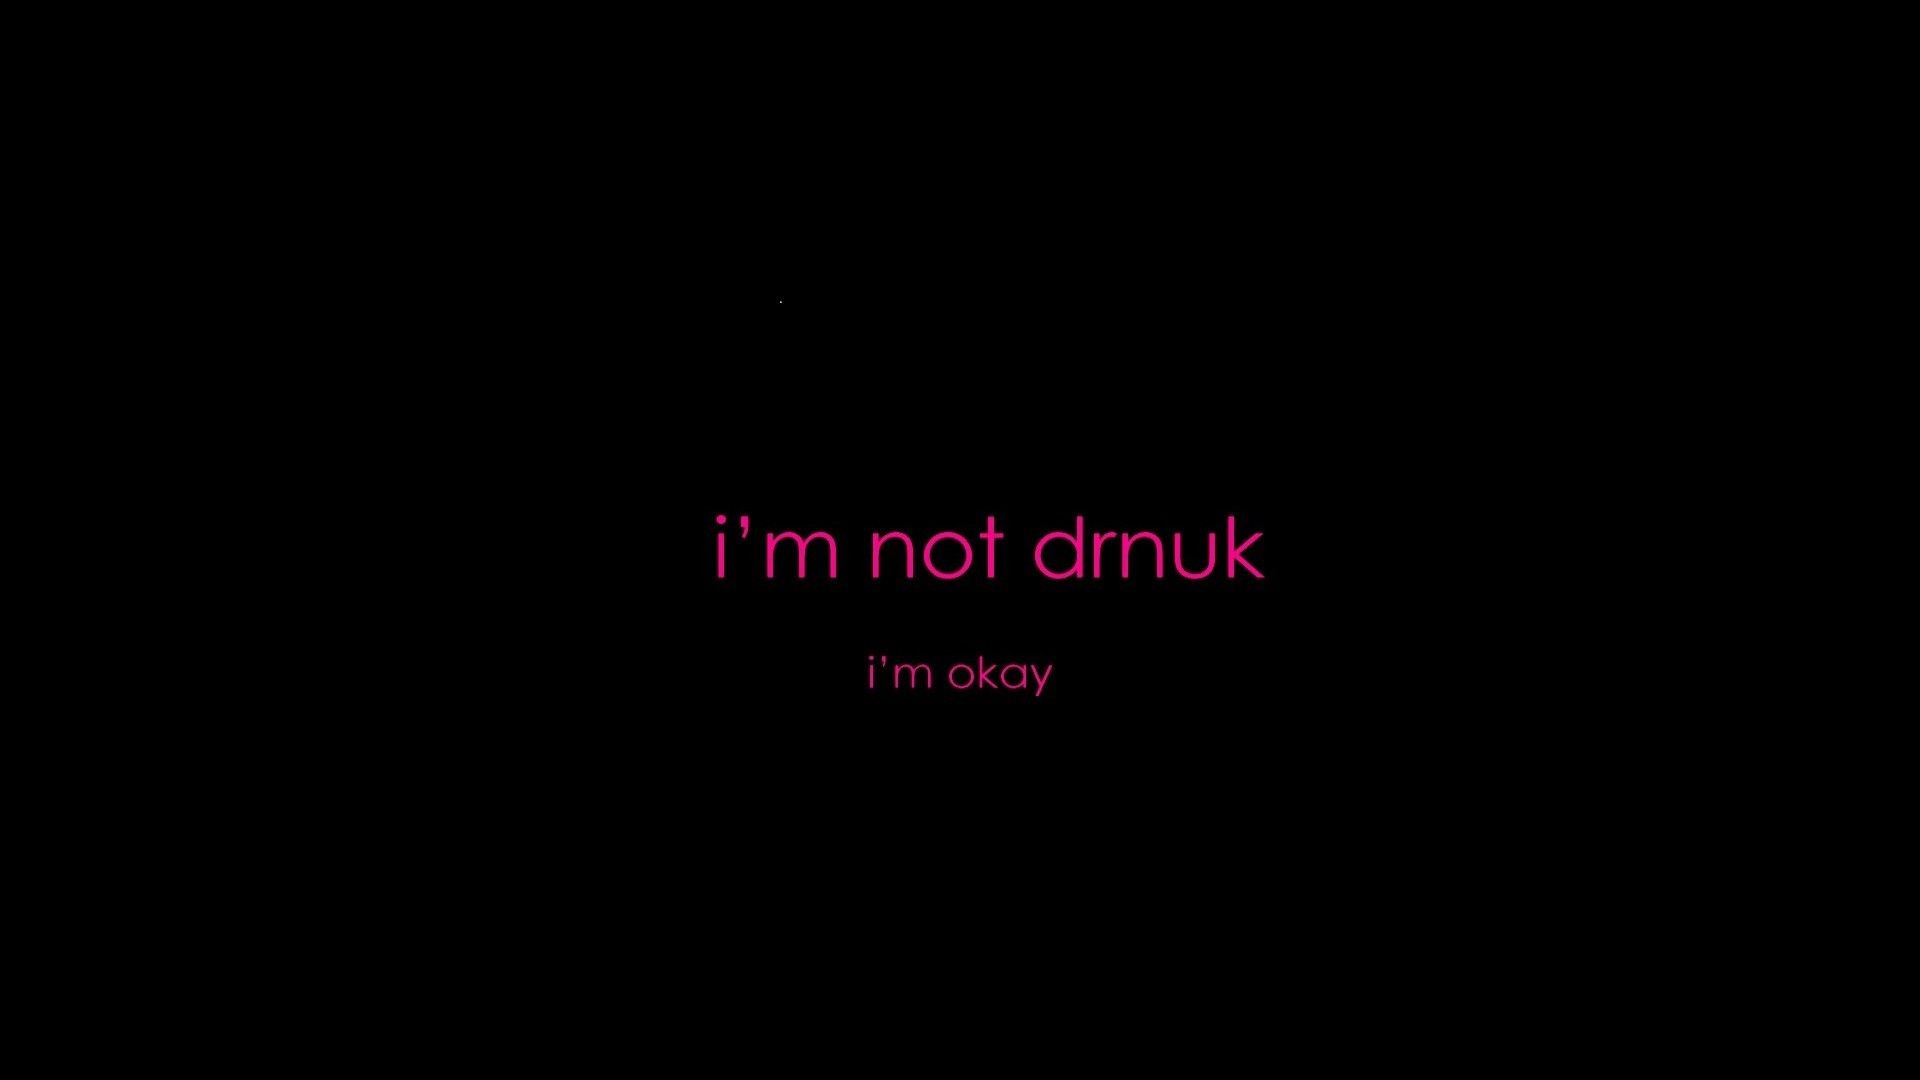 General 1920x1080 quote simple background typography humor pink minimalism black background drunk drinking problems